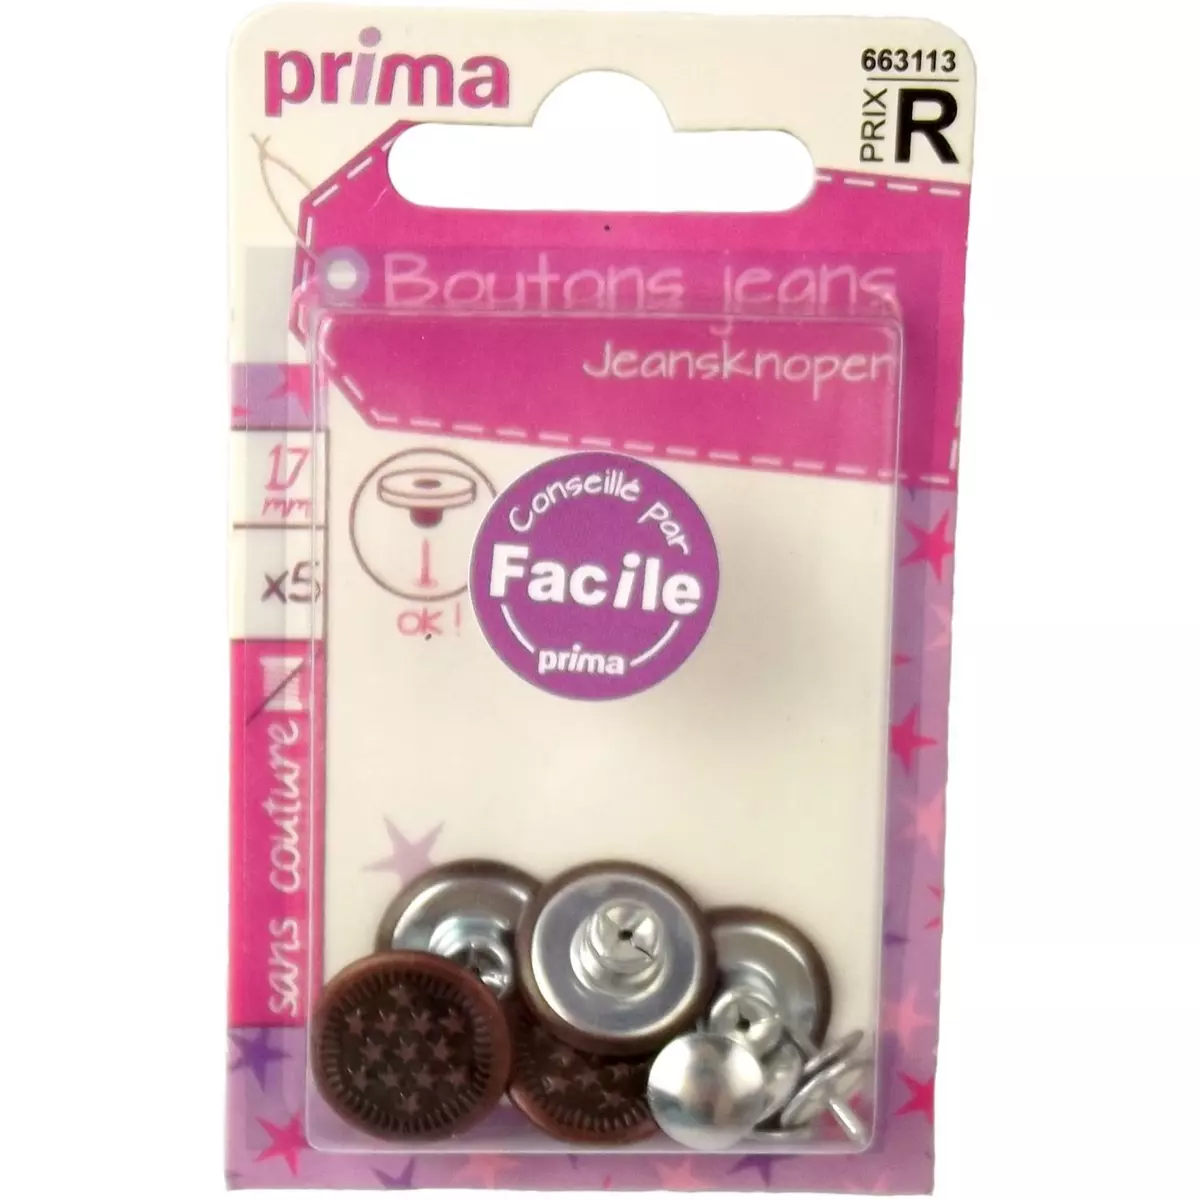 PRIMA Boutons jeans sans couture 5 boutons